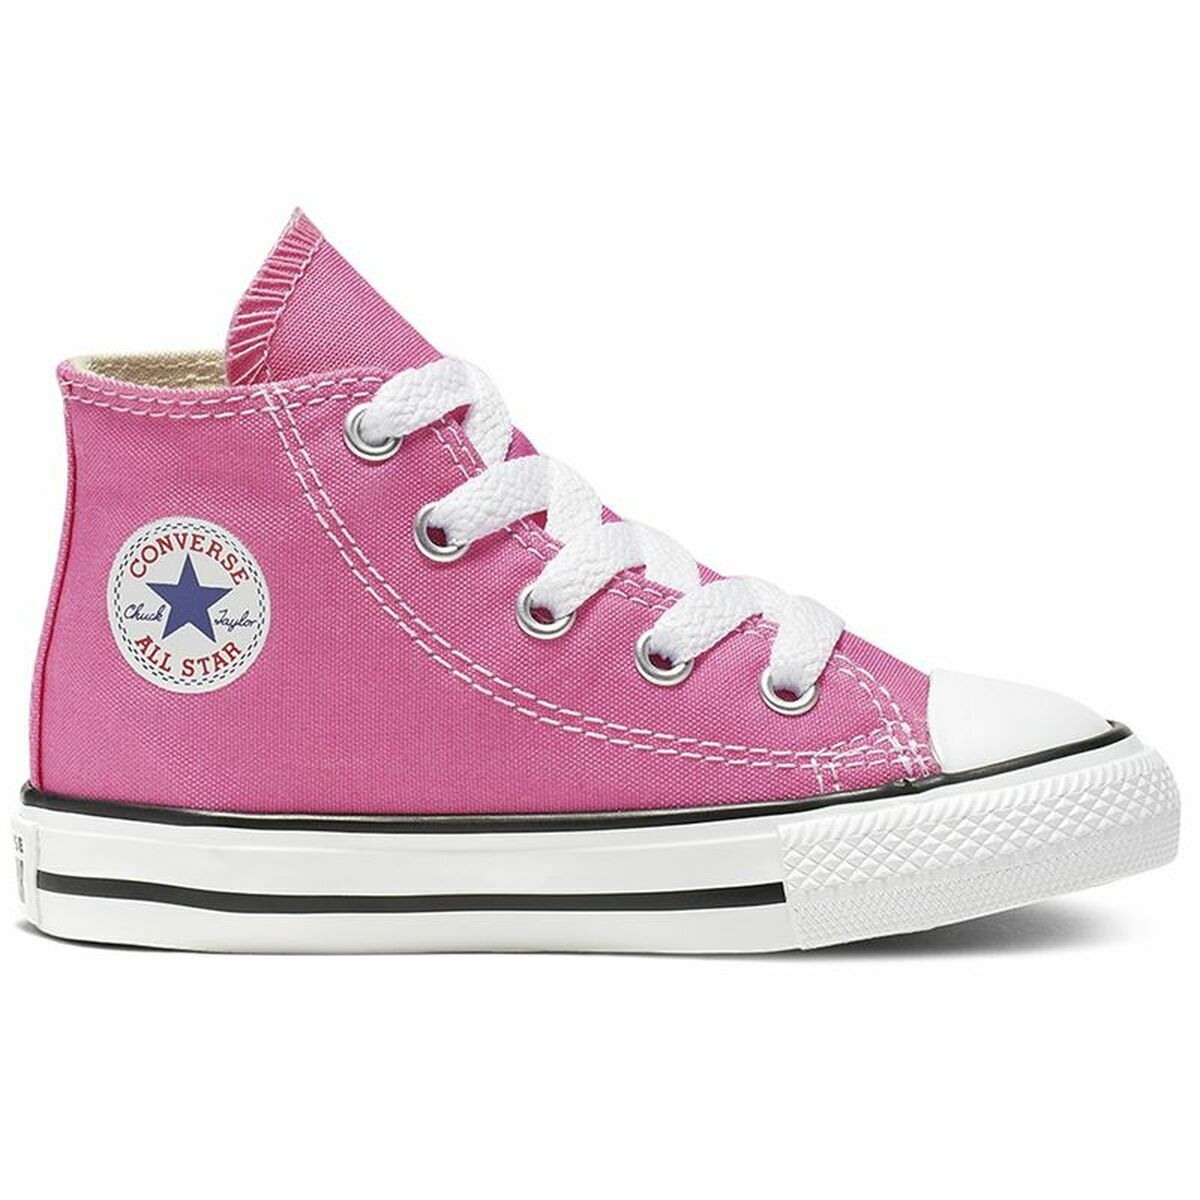 Sports Shoes For Kids Chuck Taylor Converse All Star Classic 42628 Pink-Toys | Fancy Dress > Babies and Children > Clothes and Footwear for Children-Converse-Urbanheer